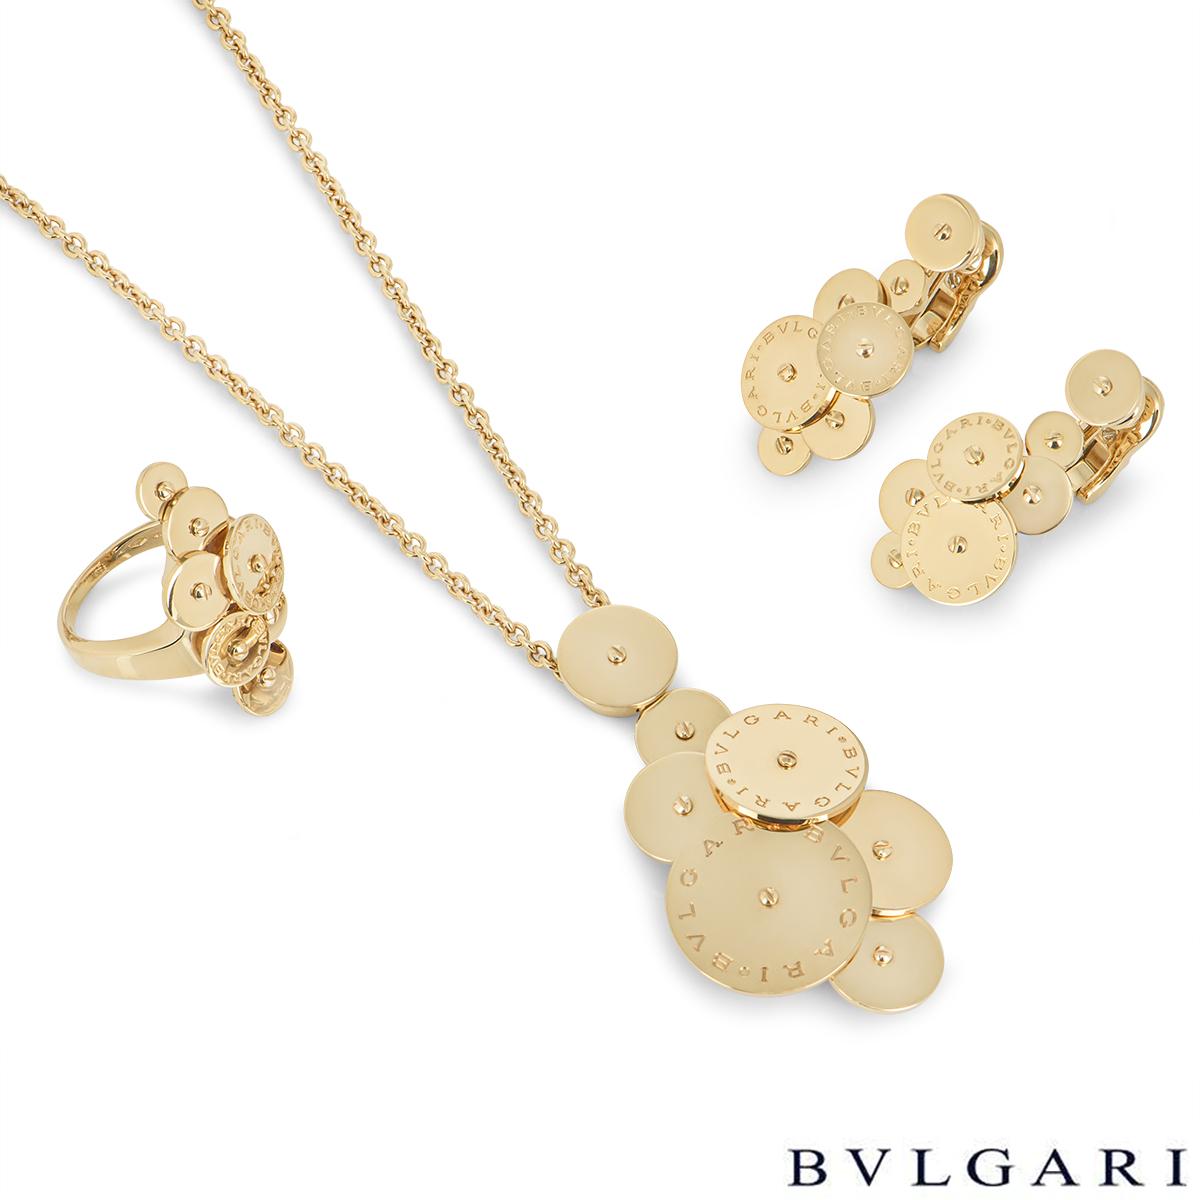 A stunning 18k yellow gold jewellery suite by Bvlgari from the Cicladi collection. The suite comprises of a pendant, earrings and a ring. The pendant features 7 circular spinning discs, each alternating in size, 2 of which are engraved with the